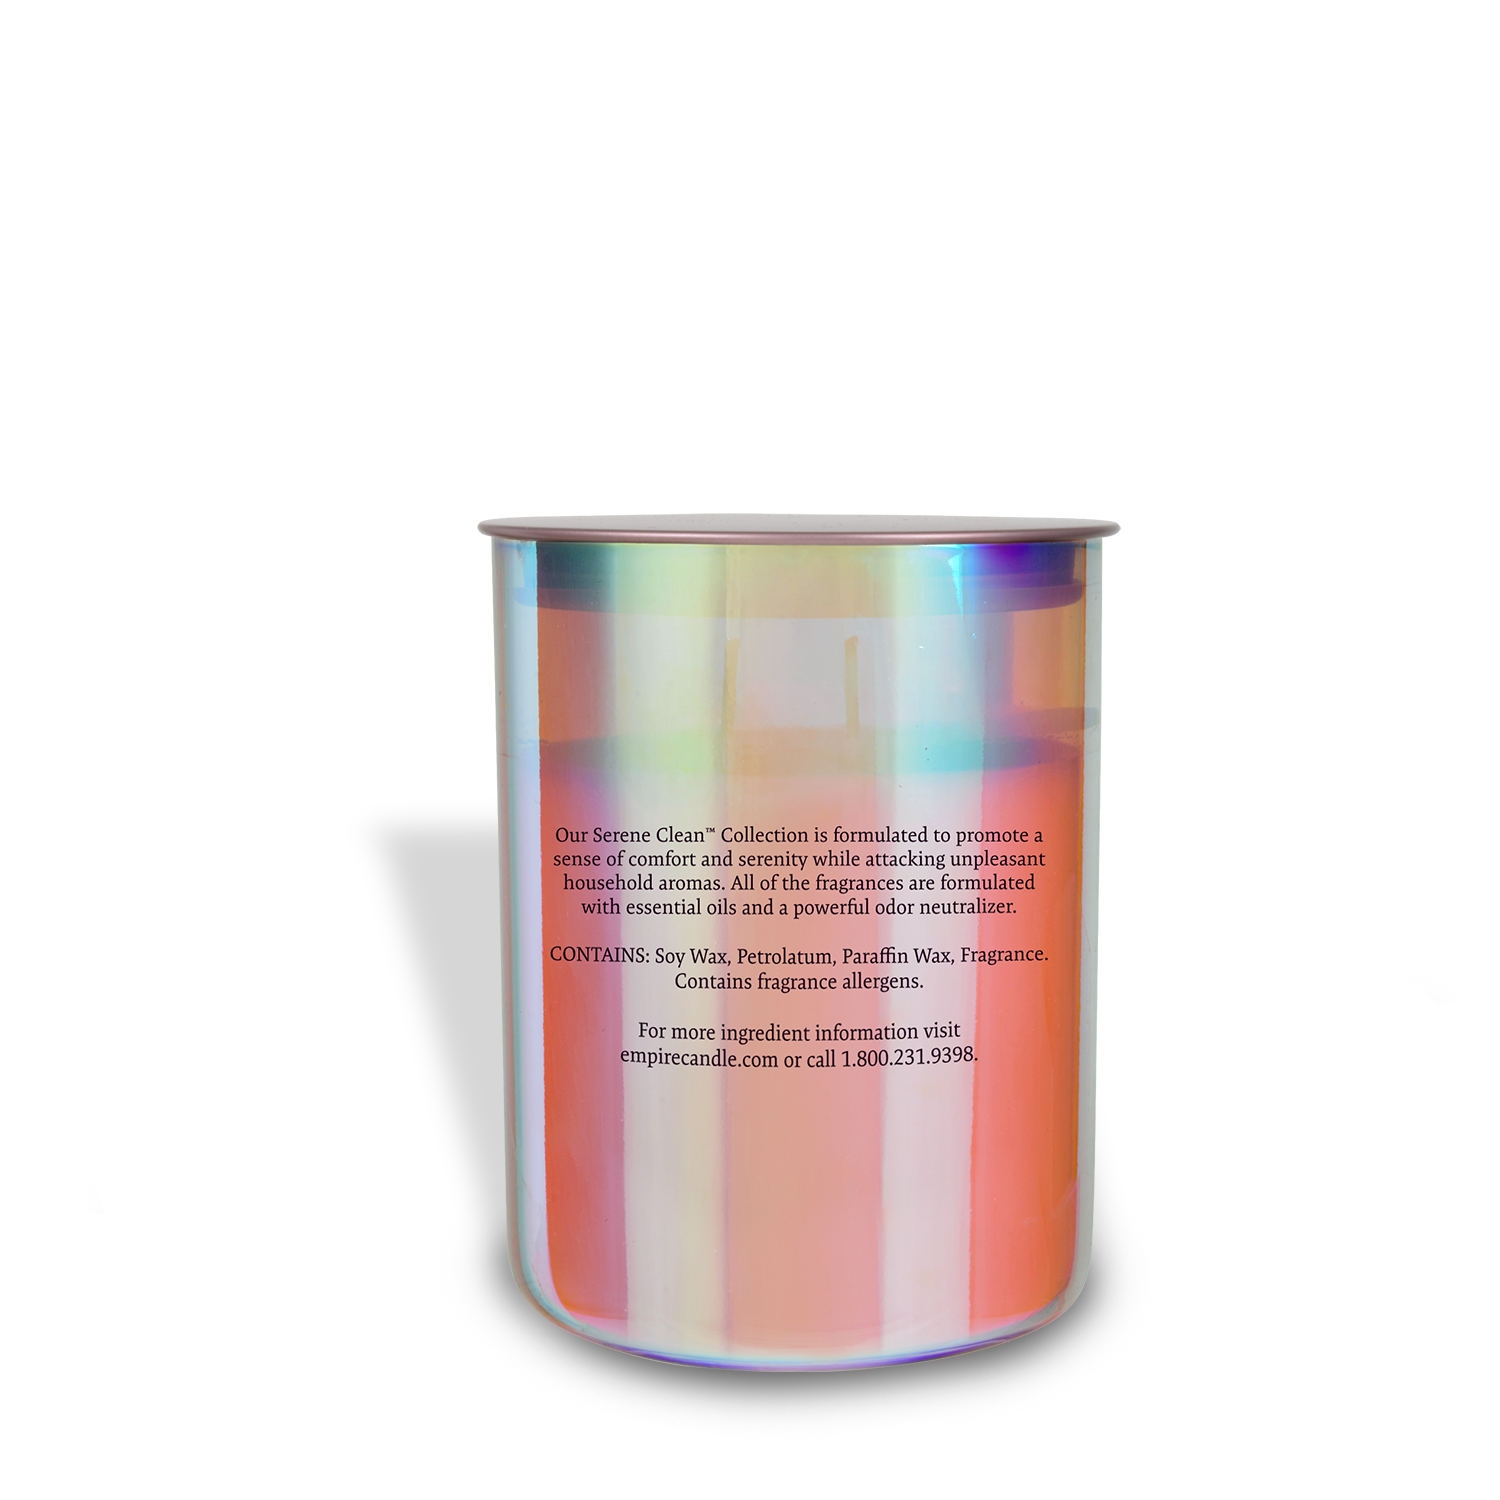 A tin container with an iridescent label on it, containing a Pink Grapefruit Scented Jar Candle (12 oz) from the Serene Clean Collection for odor control by Tuscany Candle® EVD.